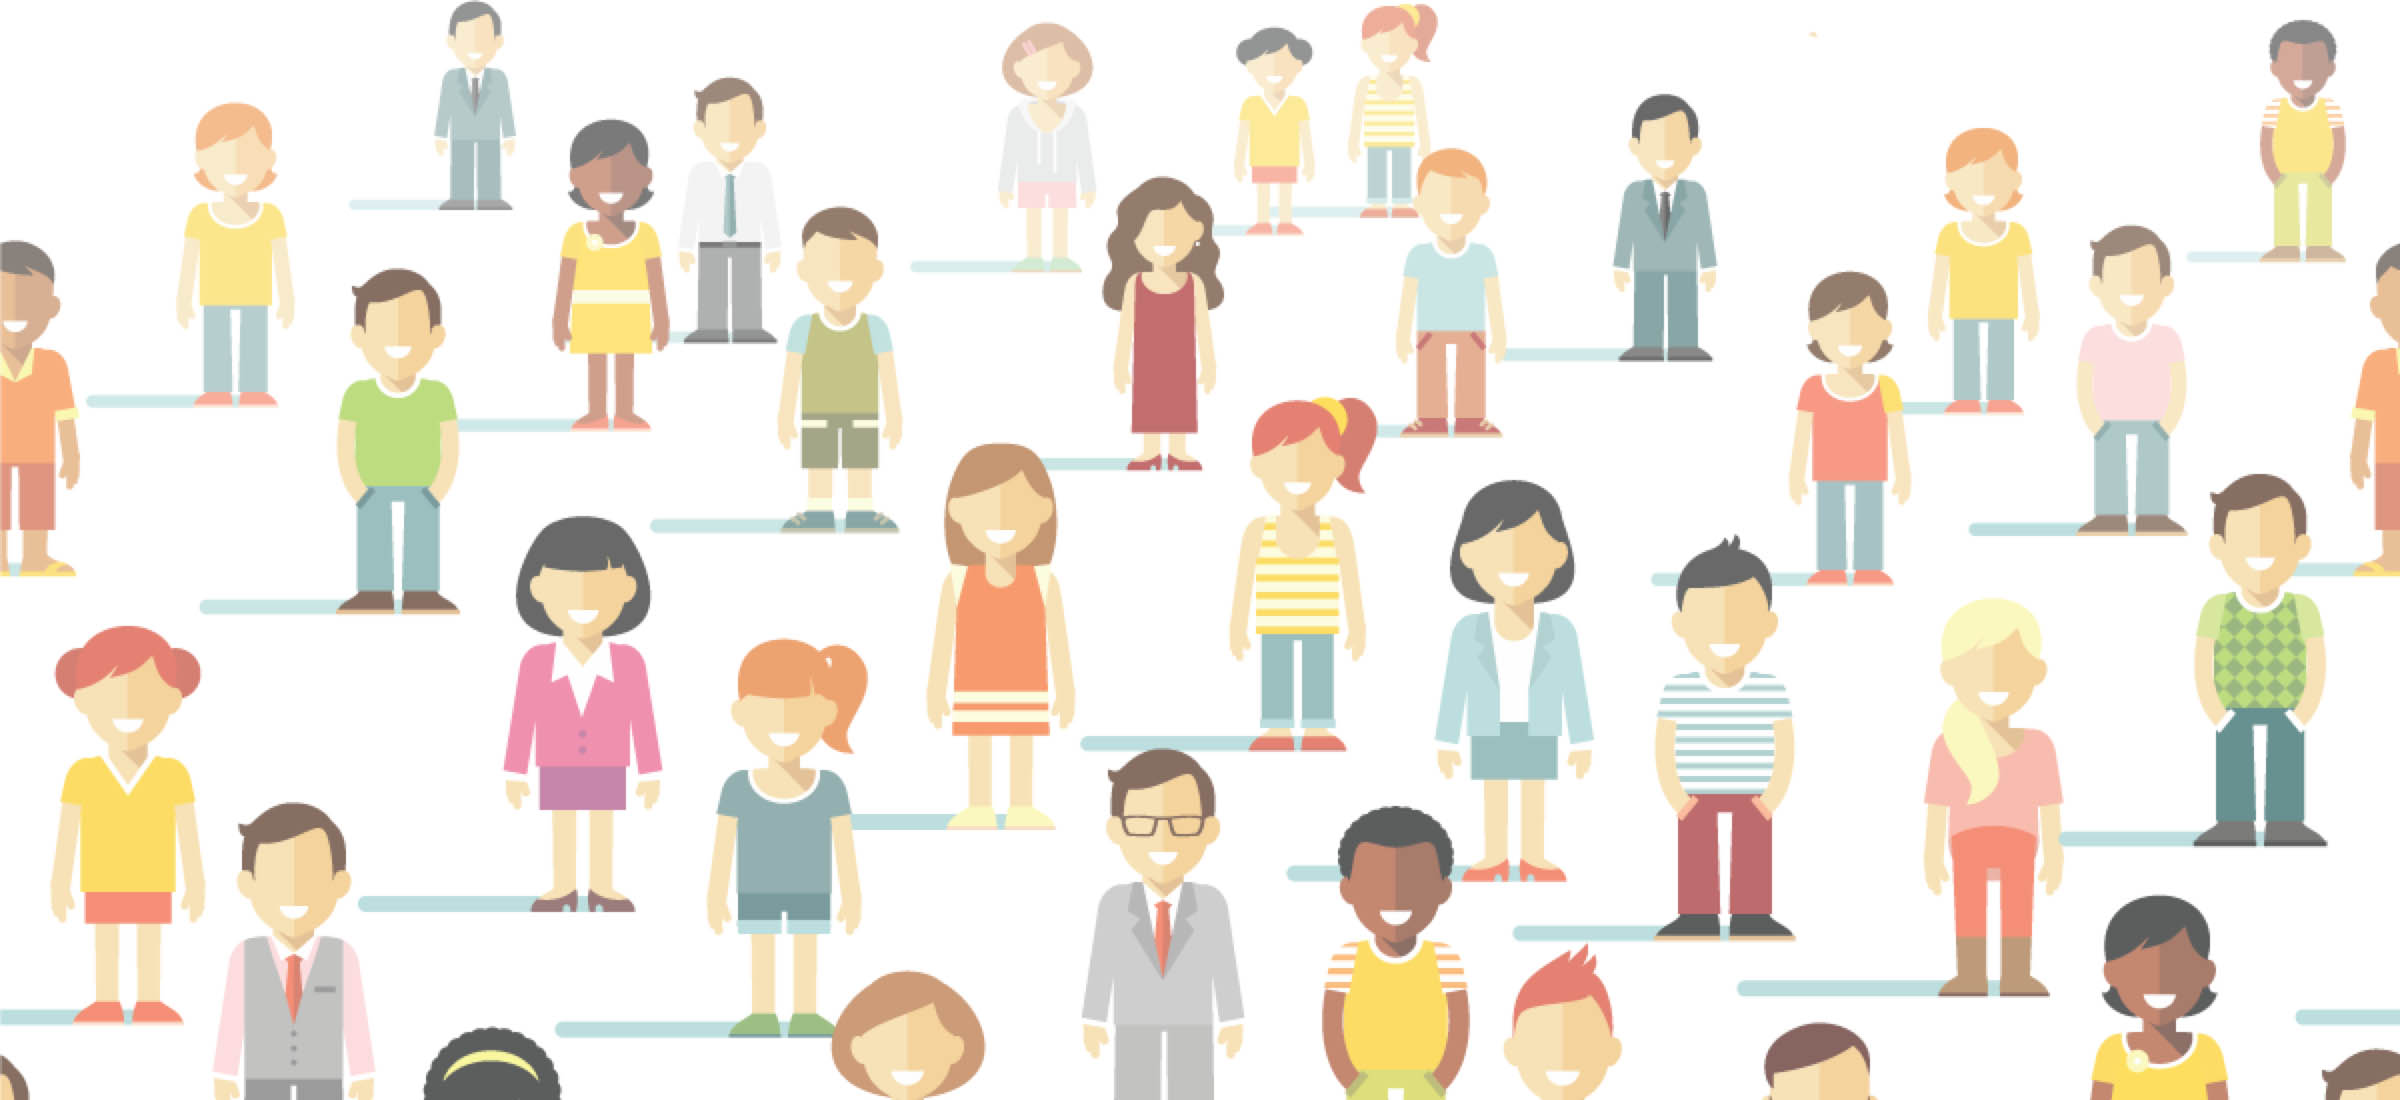 Collage of illustrated people representing diversity